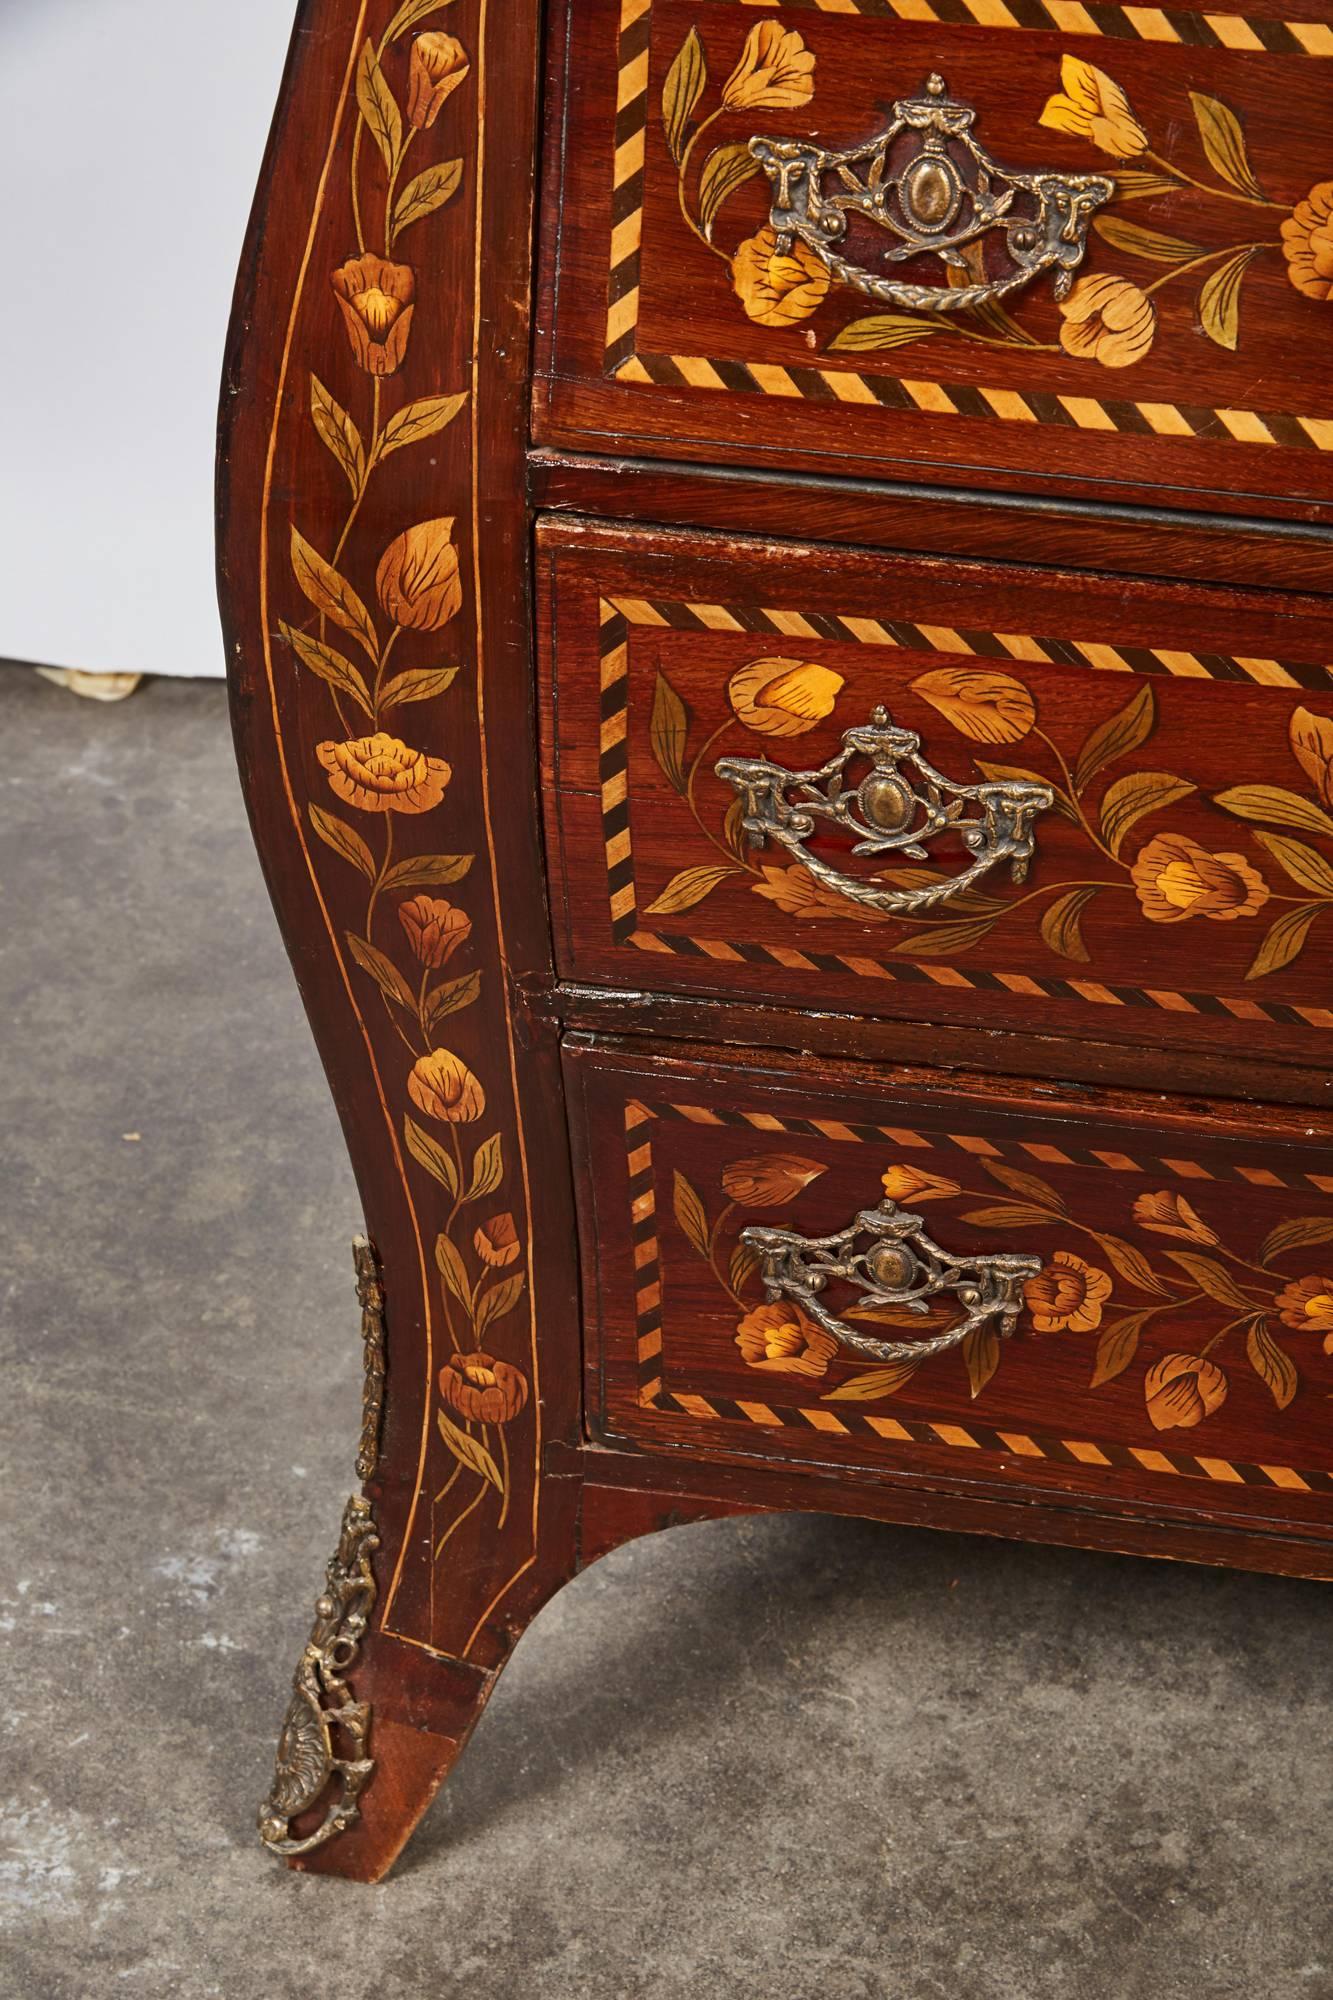 A highly decorated three-drawer Dutch mahogany bow front chest with inlaid foliage, bird and rocaille motifs in yellow toned and green toned woods.
  